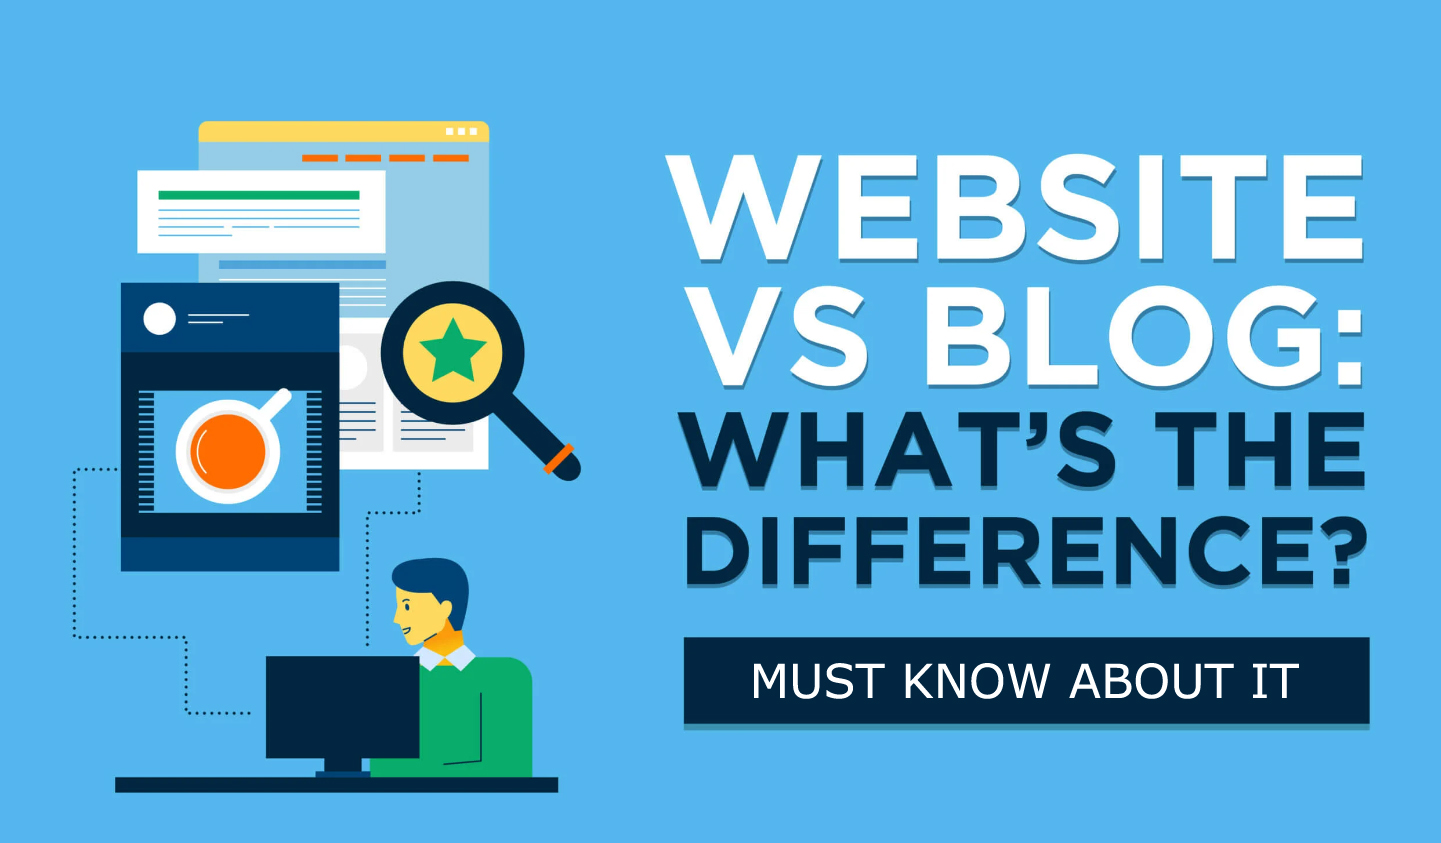 The difference between a blog and a website that you must know